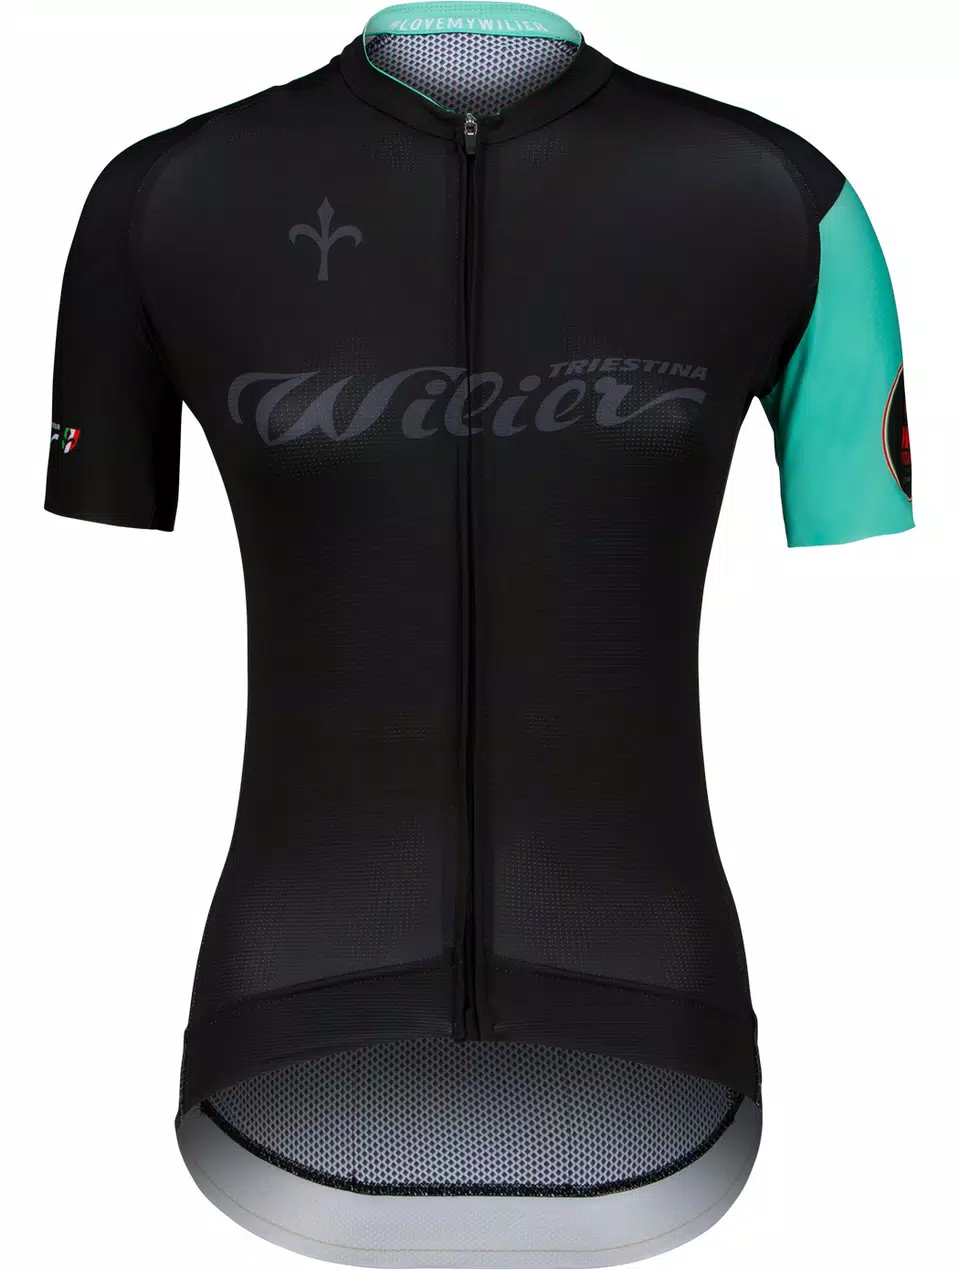 Maillot mujer Wilier Cycling Club negra